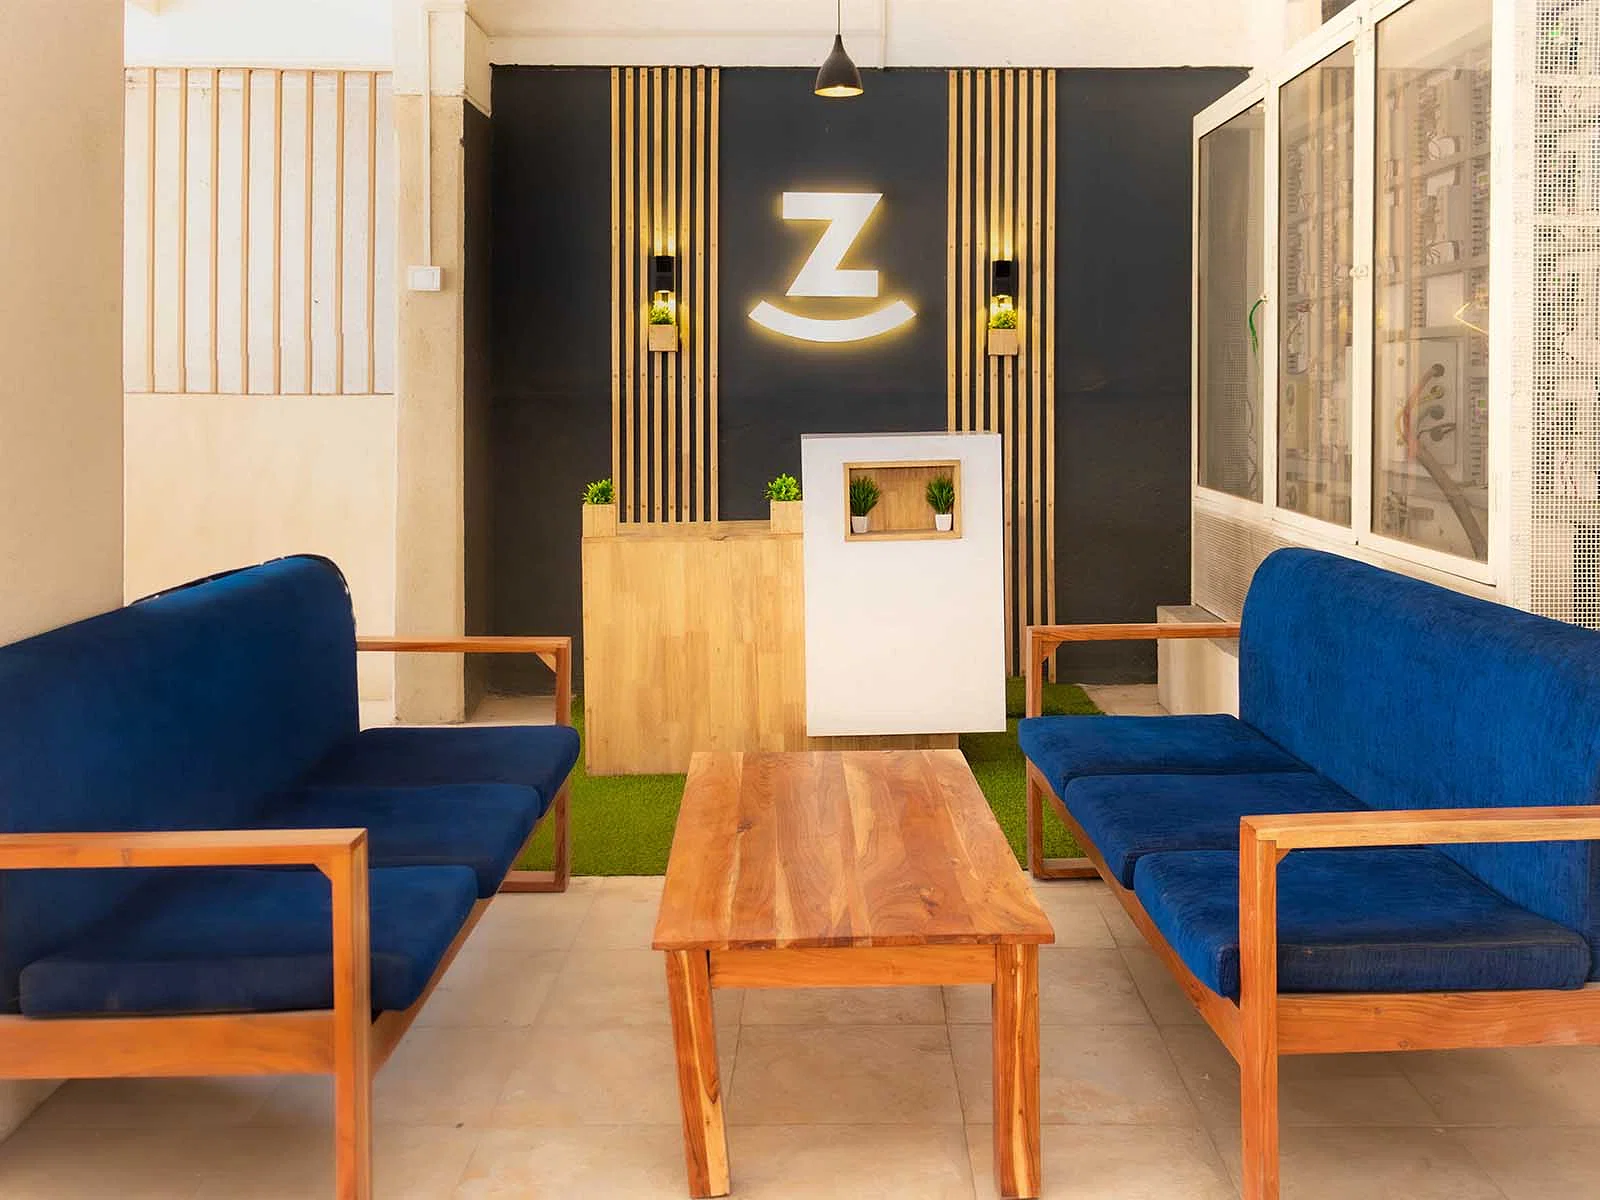 budget-friendly PGs and hostels for boys and girls with single rooms with daily hopusekeeping-Zolo Ethics